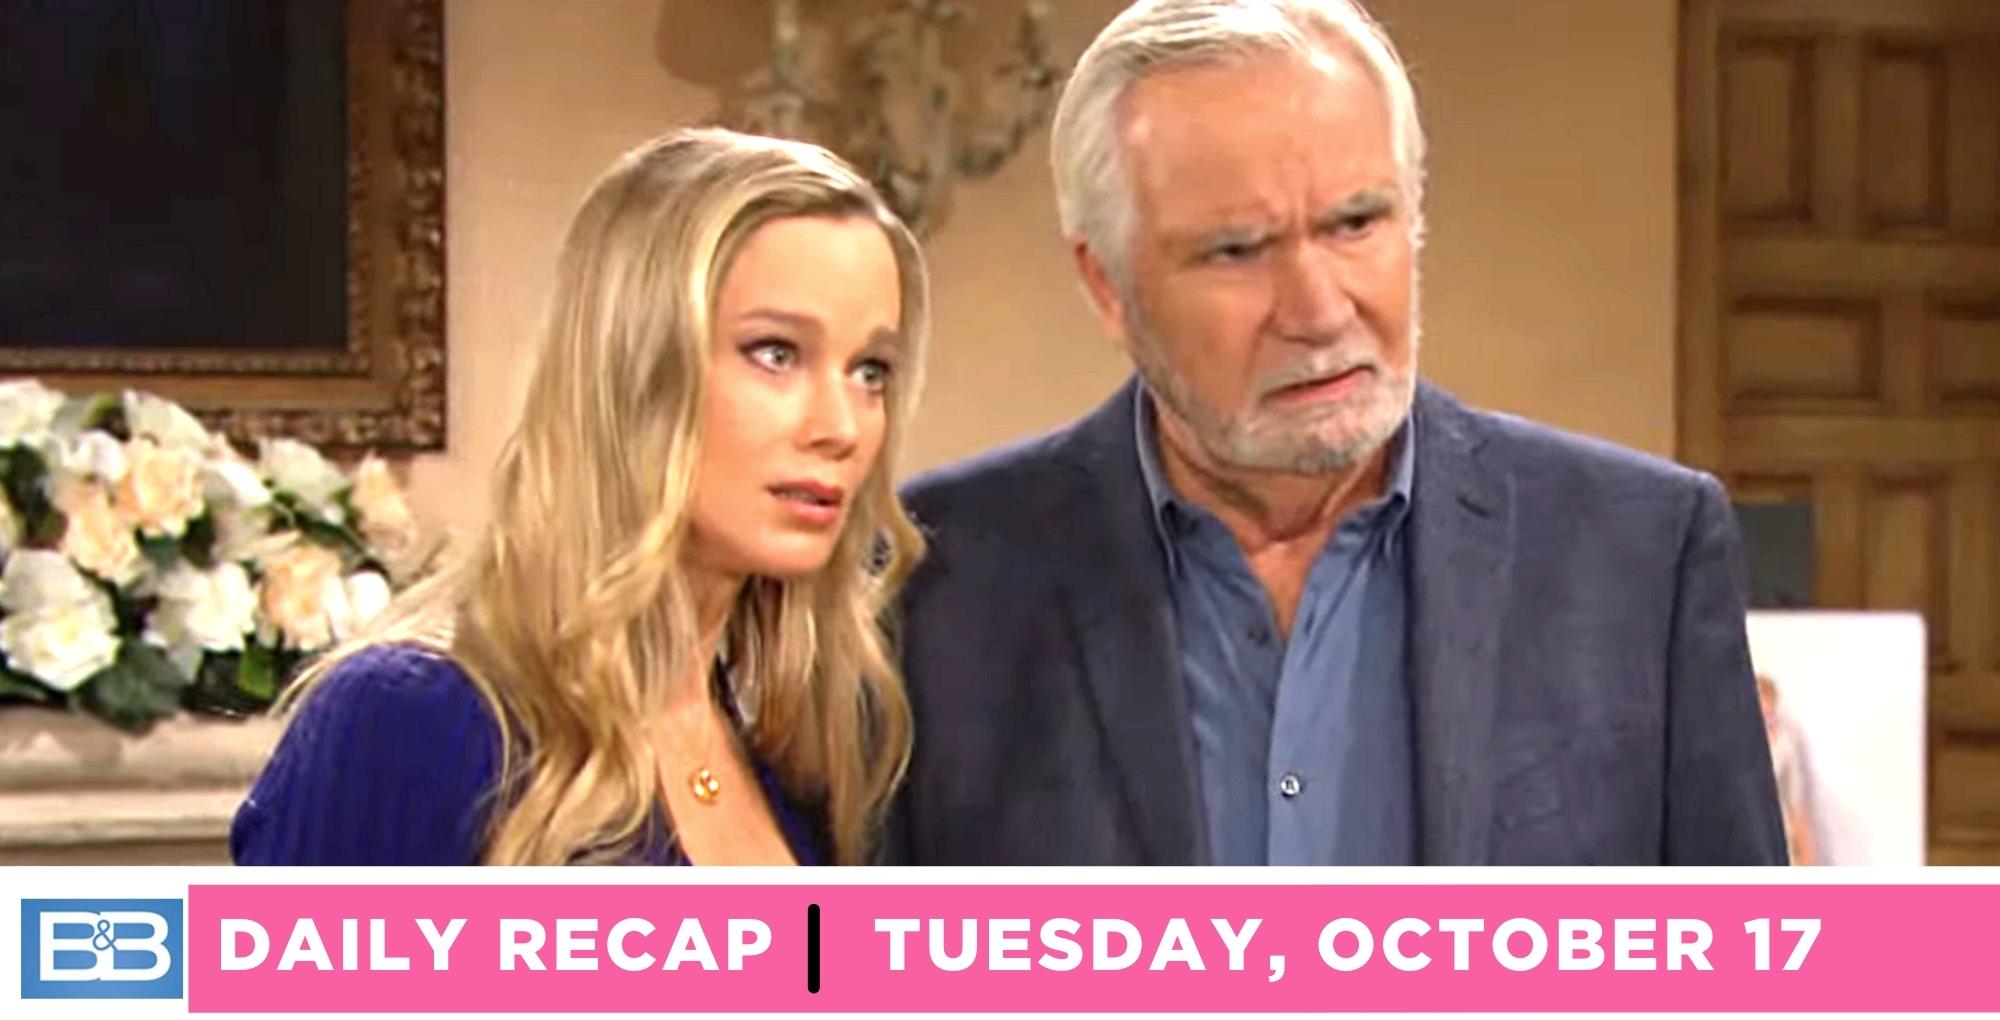 the bold and the beautiful recap for tuesday, october 17, 2023, donna and eric starring ahead.